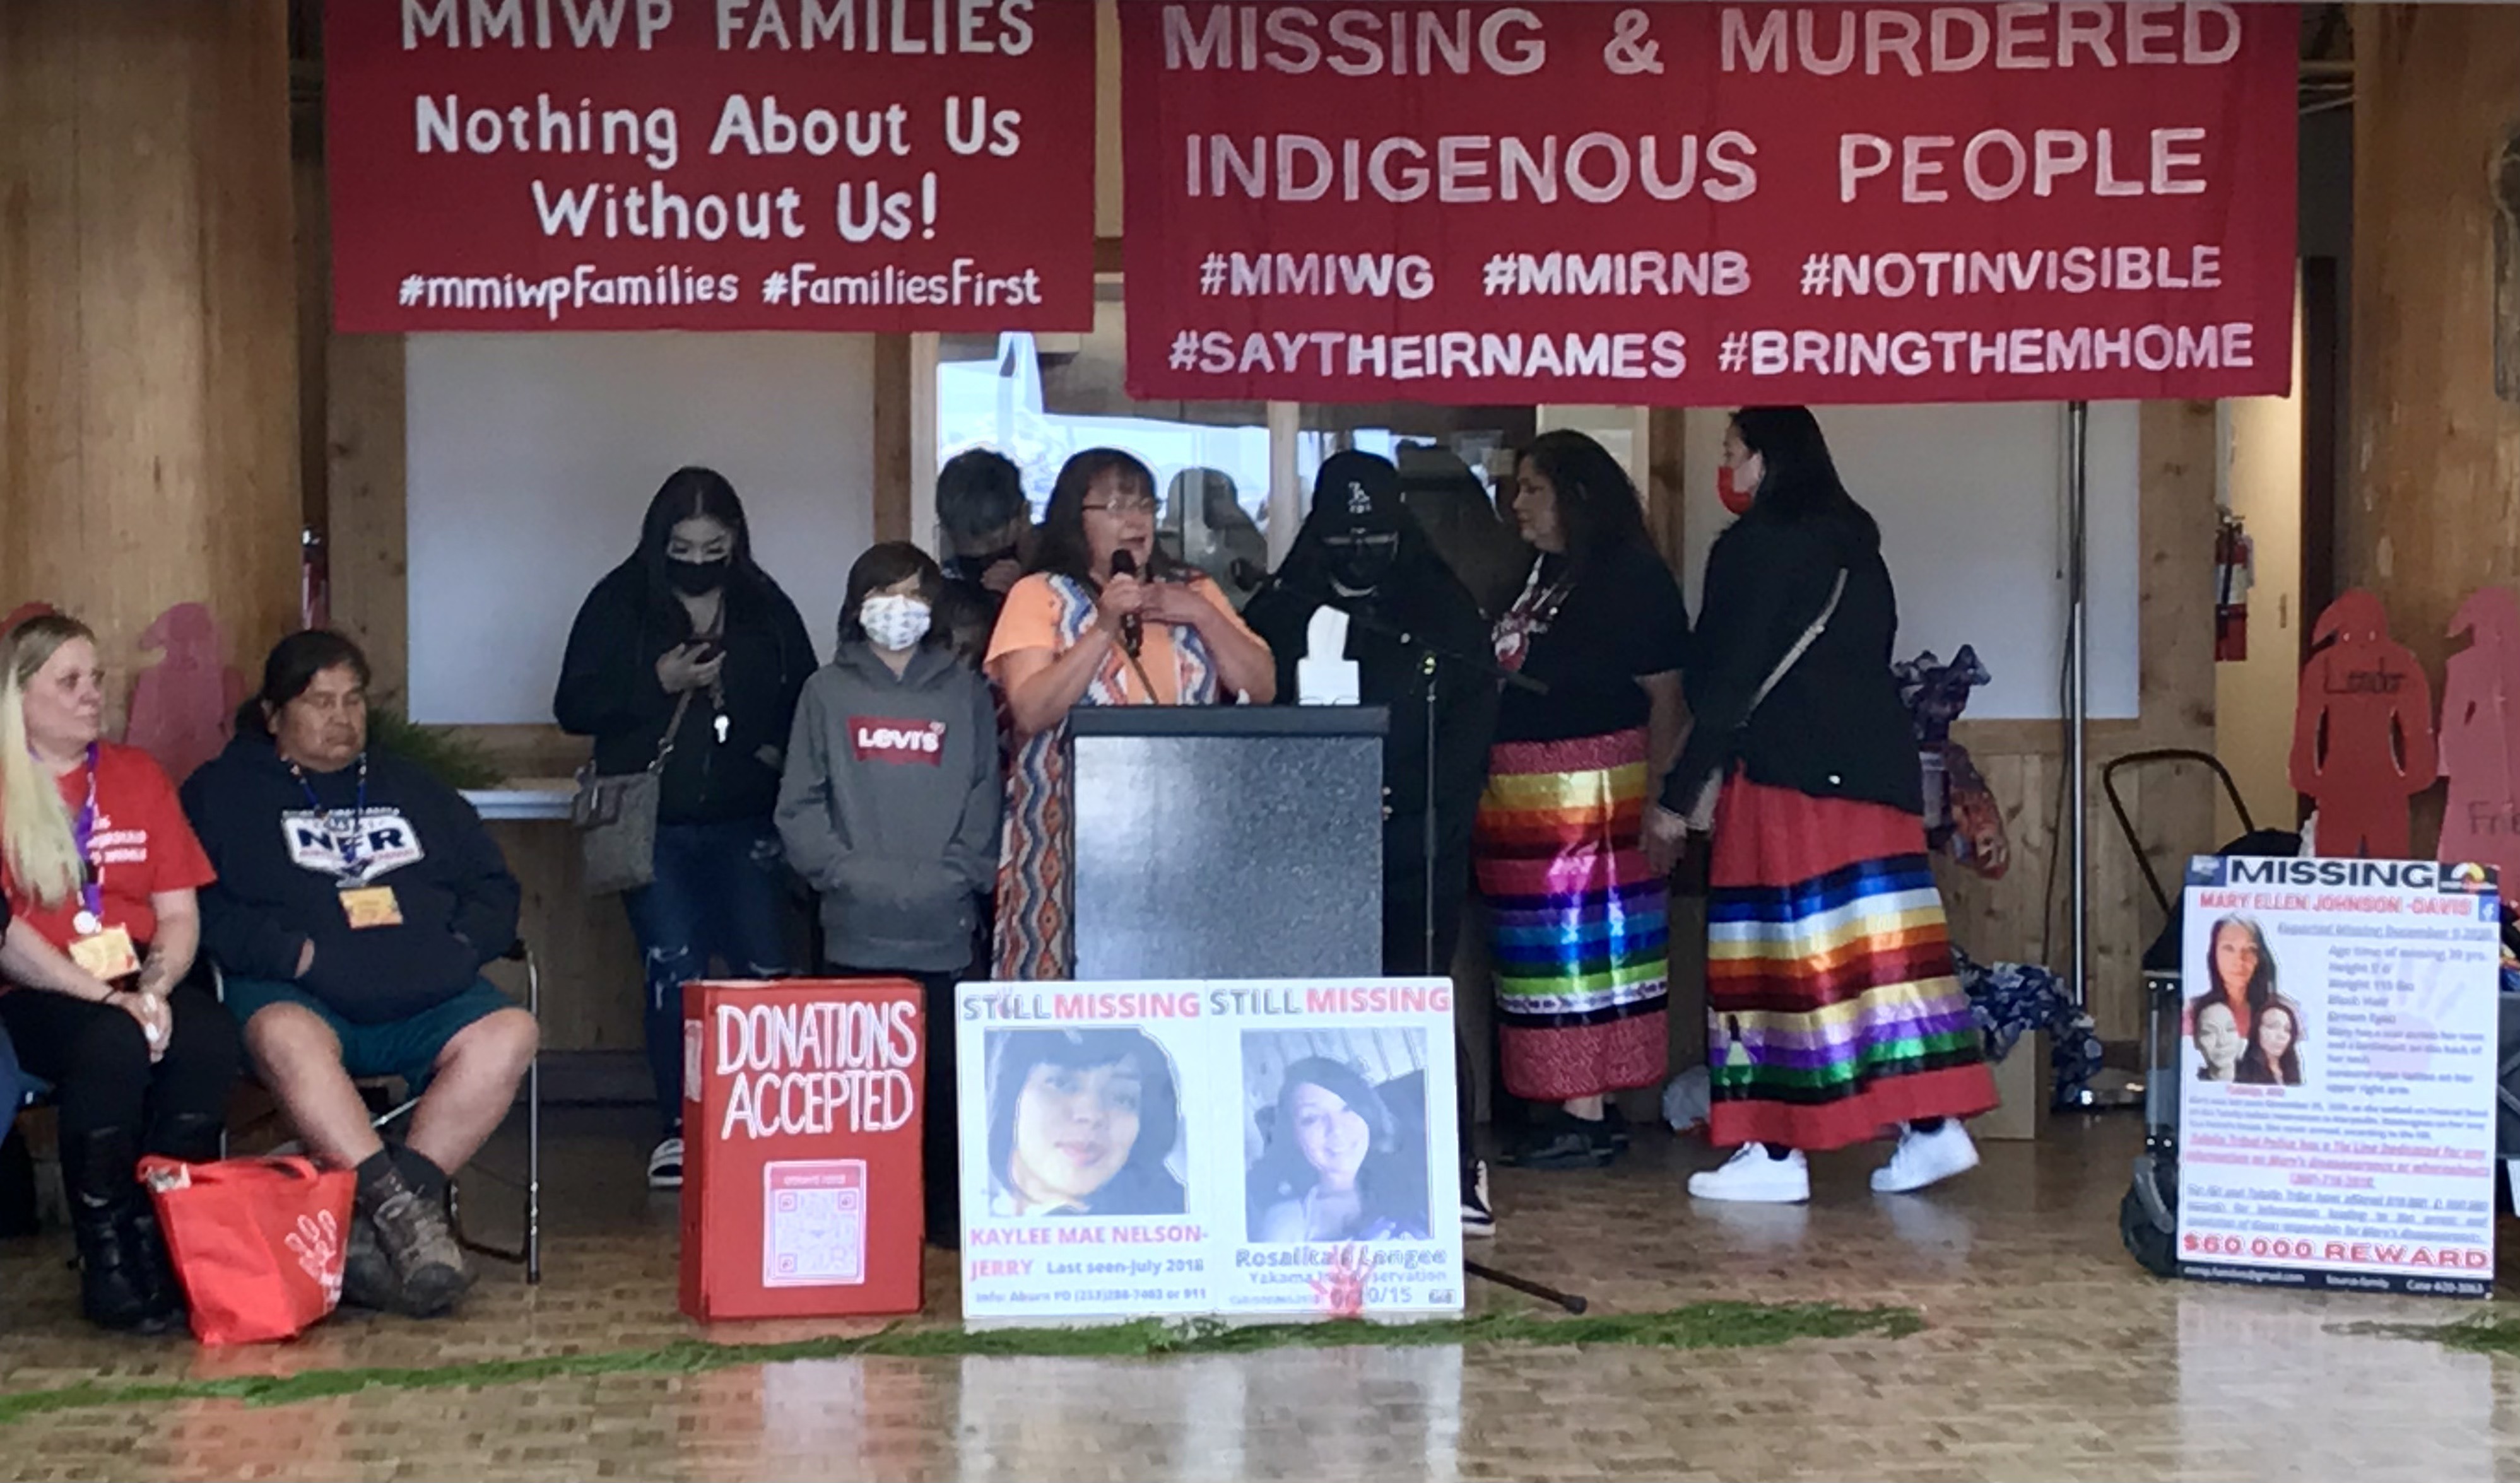 Missing and Murdered Indigenous Women and People Awareness Day